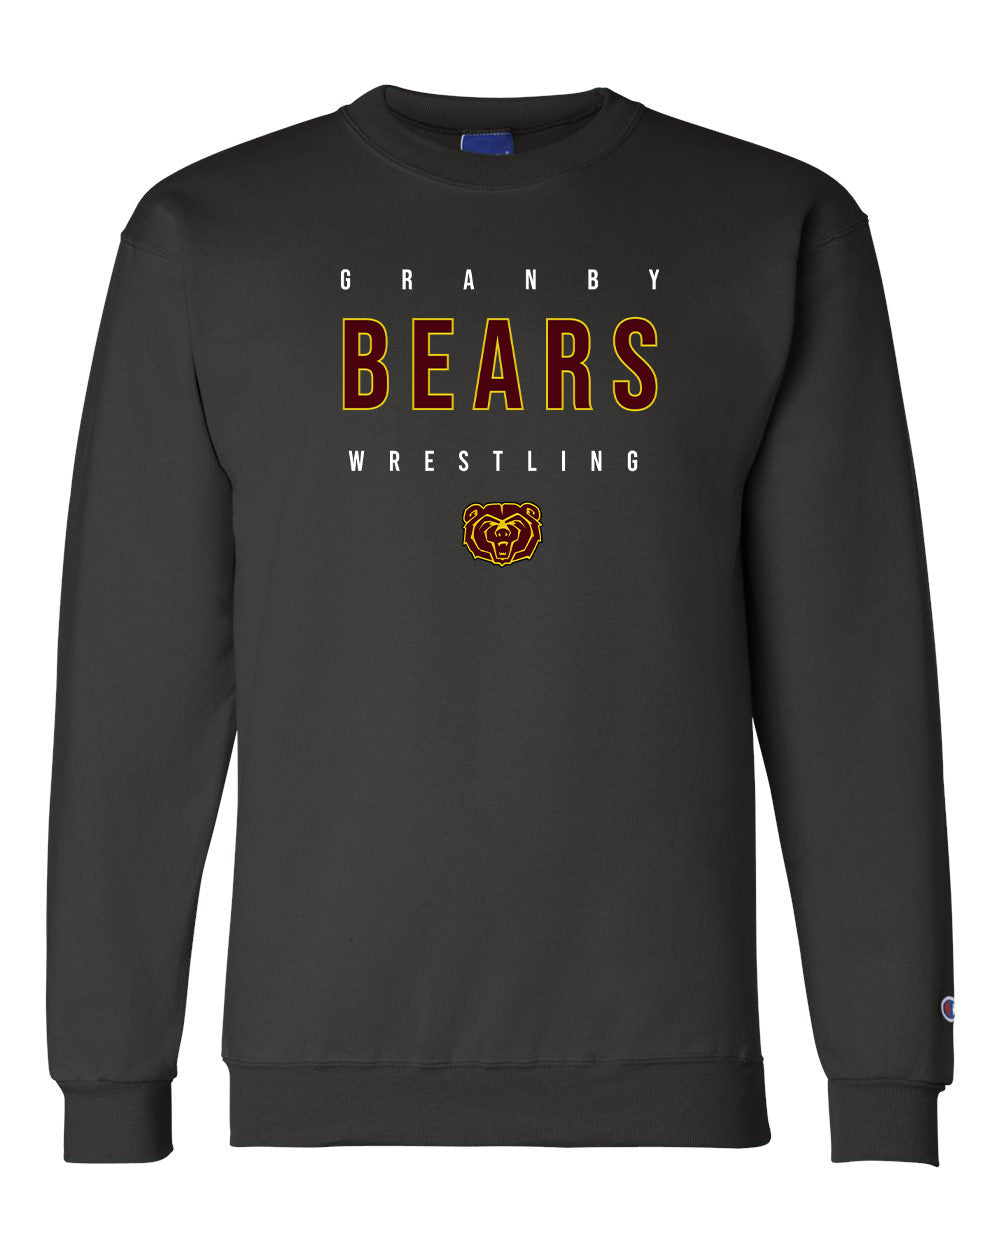 Granby High Wrestling Champion Crew Neck - S6000 (color options available)